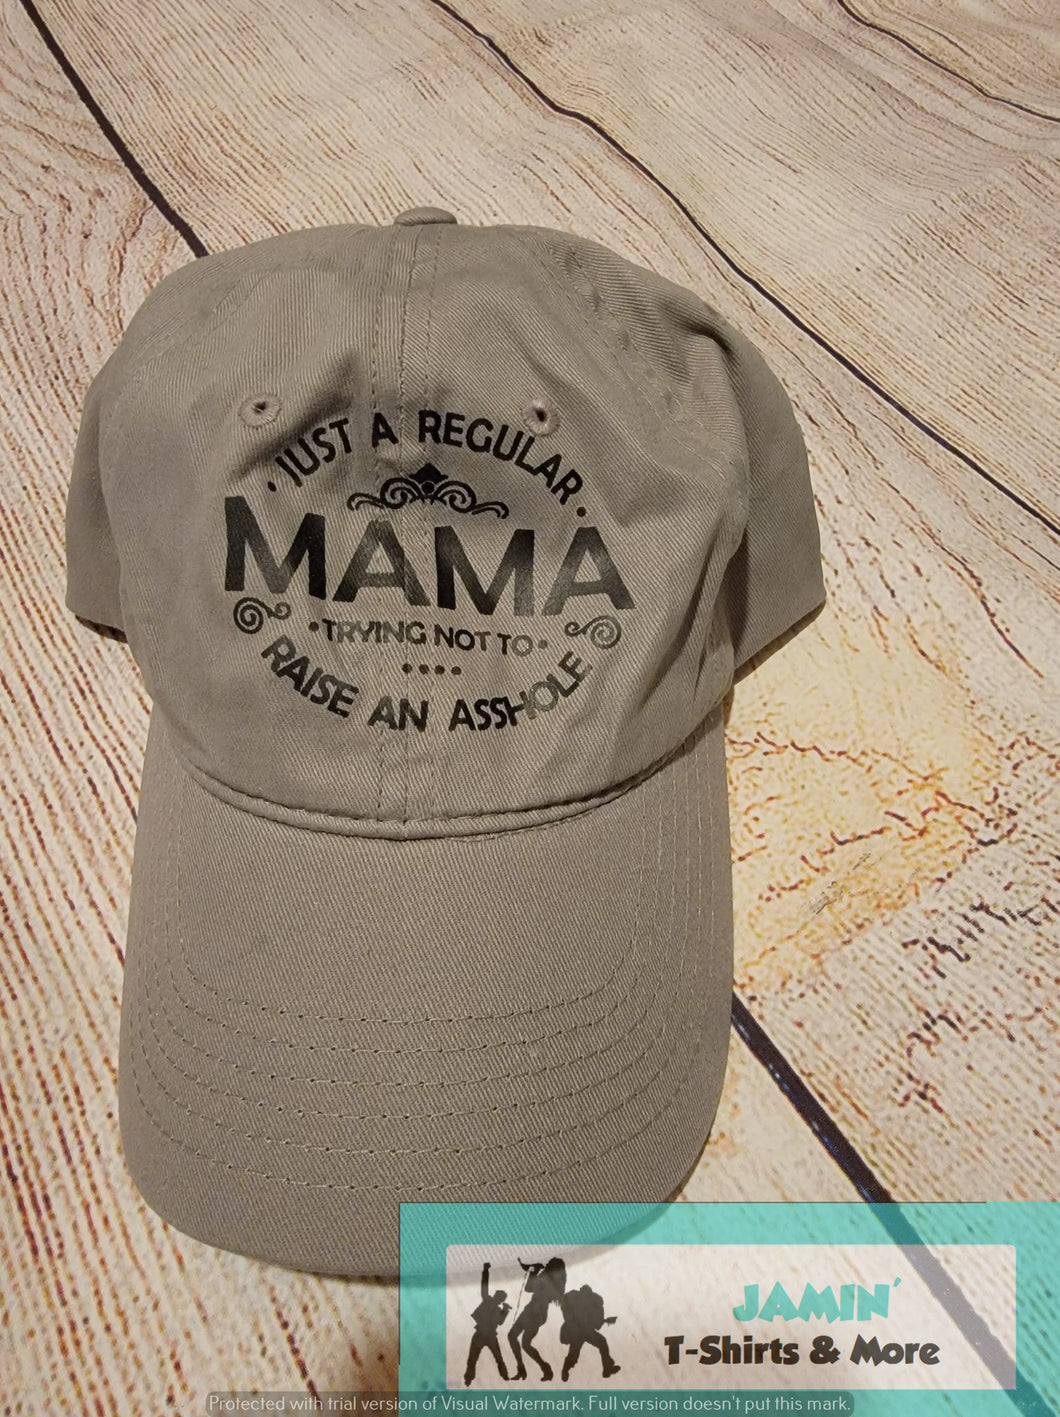 Just a Regular Mama Trying Not to Raise an Asshole (Hat)